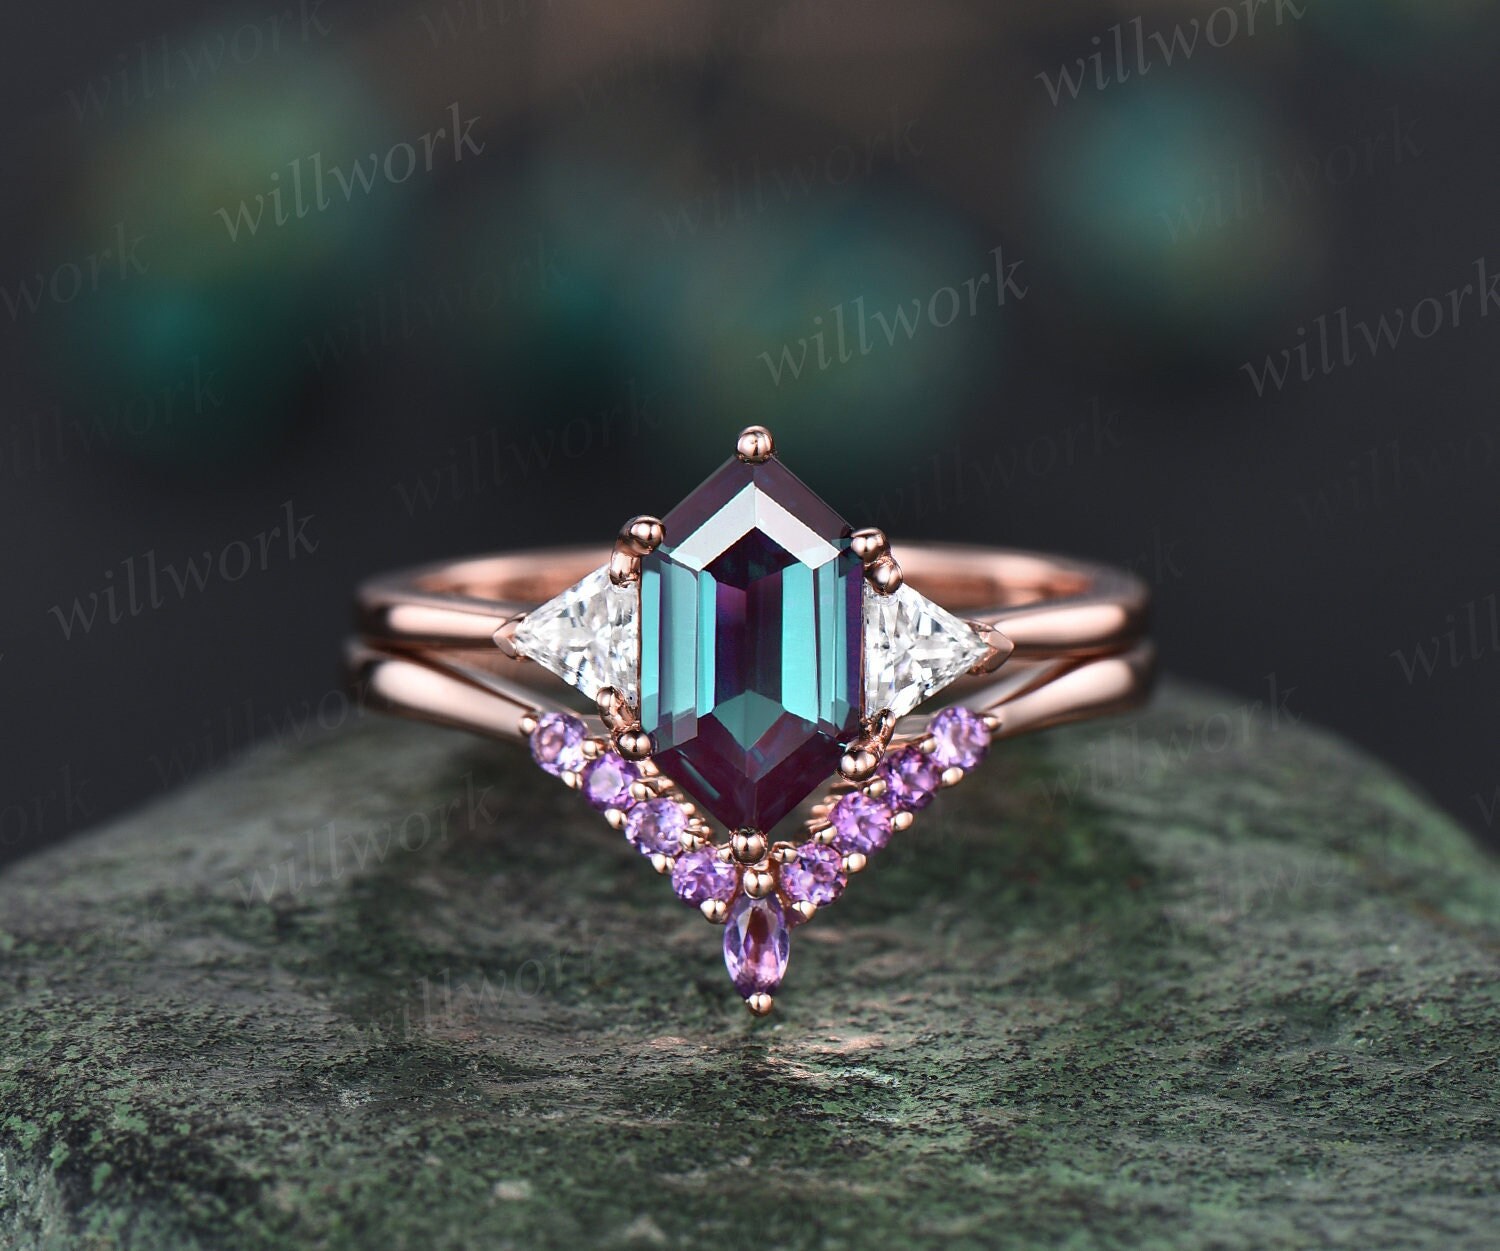 stable quality Oval alexandrite wedding ring rose gold leaf amethyst ring  marquise diamond wedding ring band June birthstone engagement ring promise  rings | customplastics.net.au